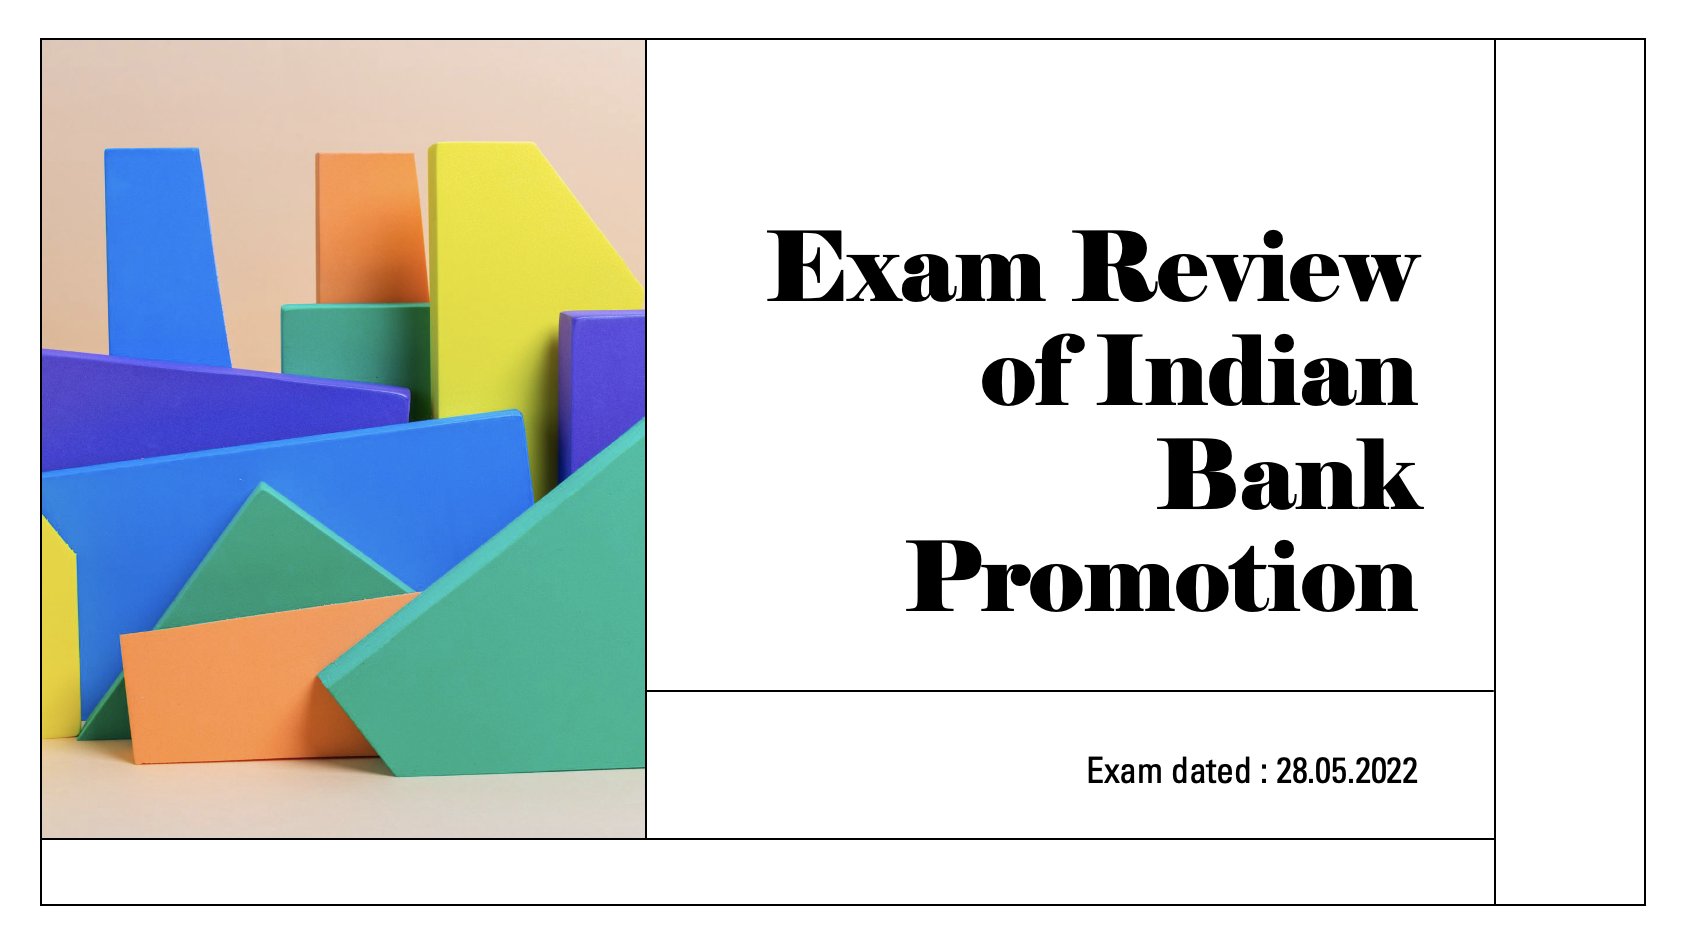 Recalled Questions of Indian Bank Promotion Exam dated 28.05.2022